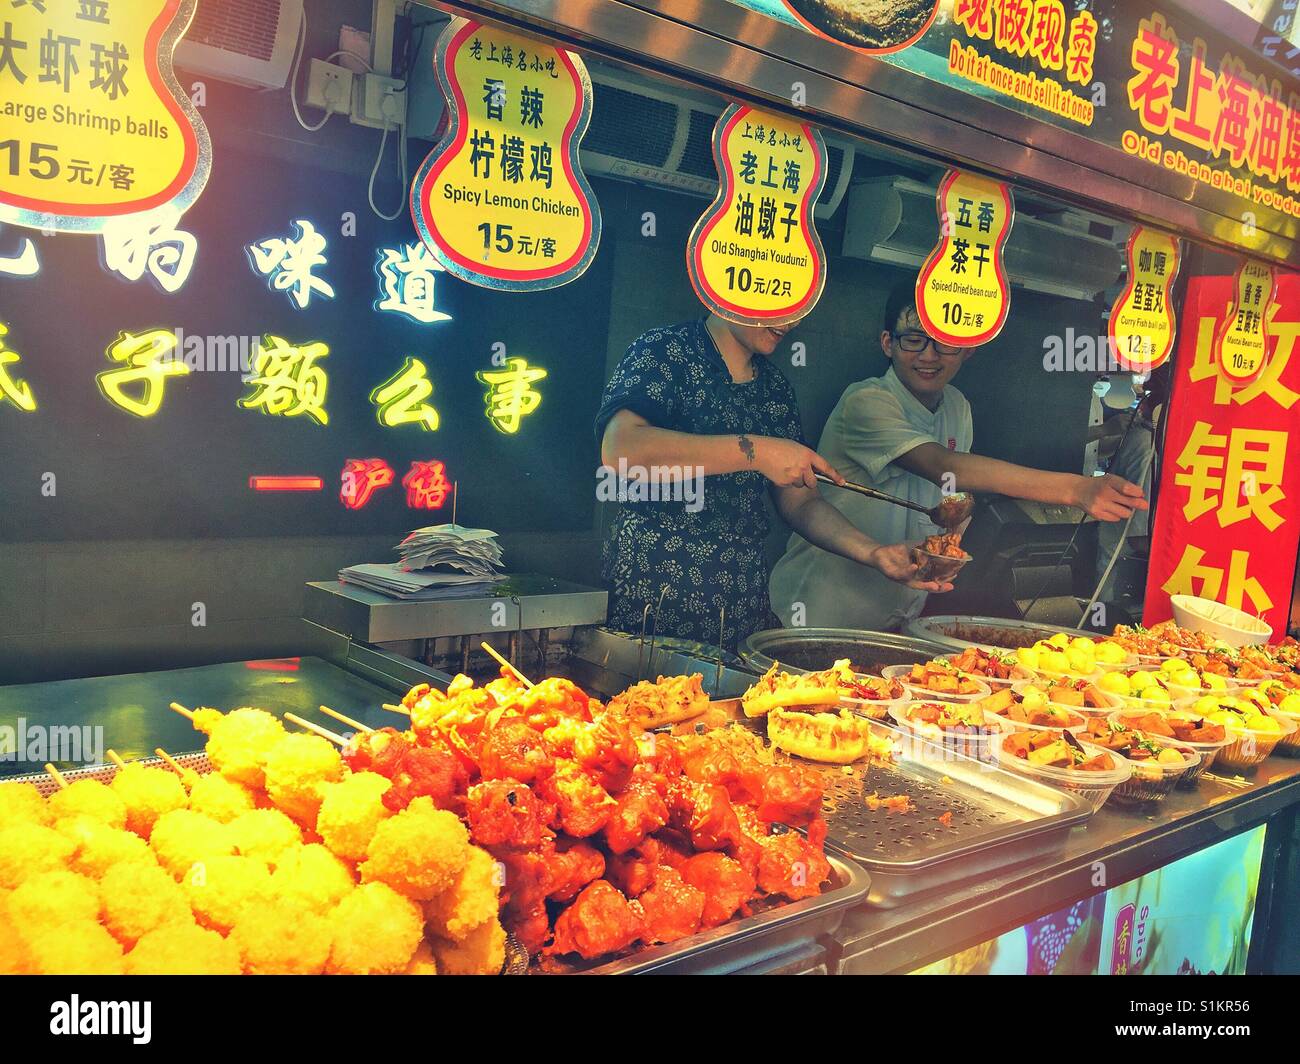 A street food stall in Shanghai. Stock Photo